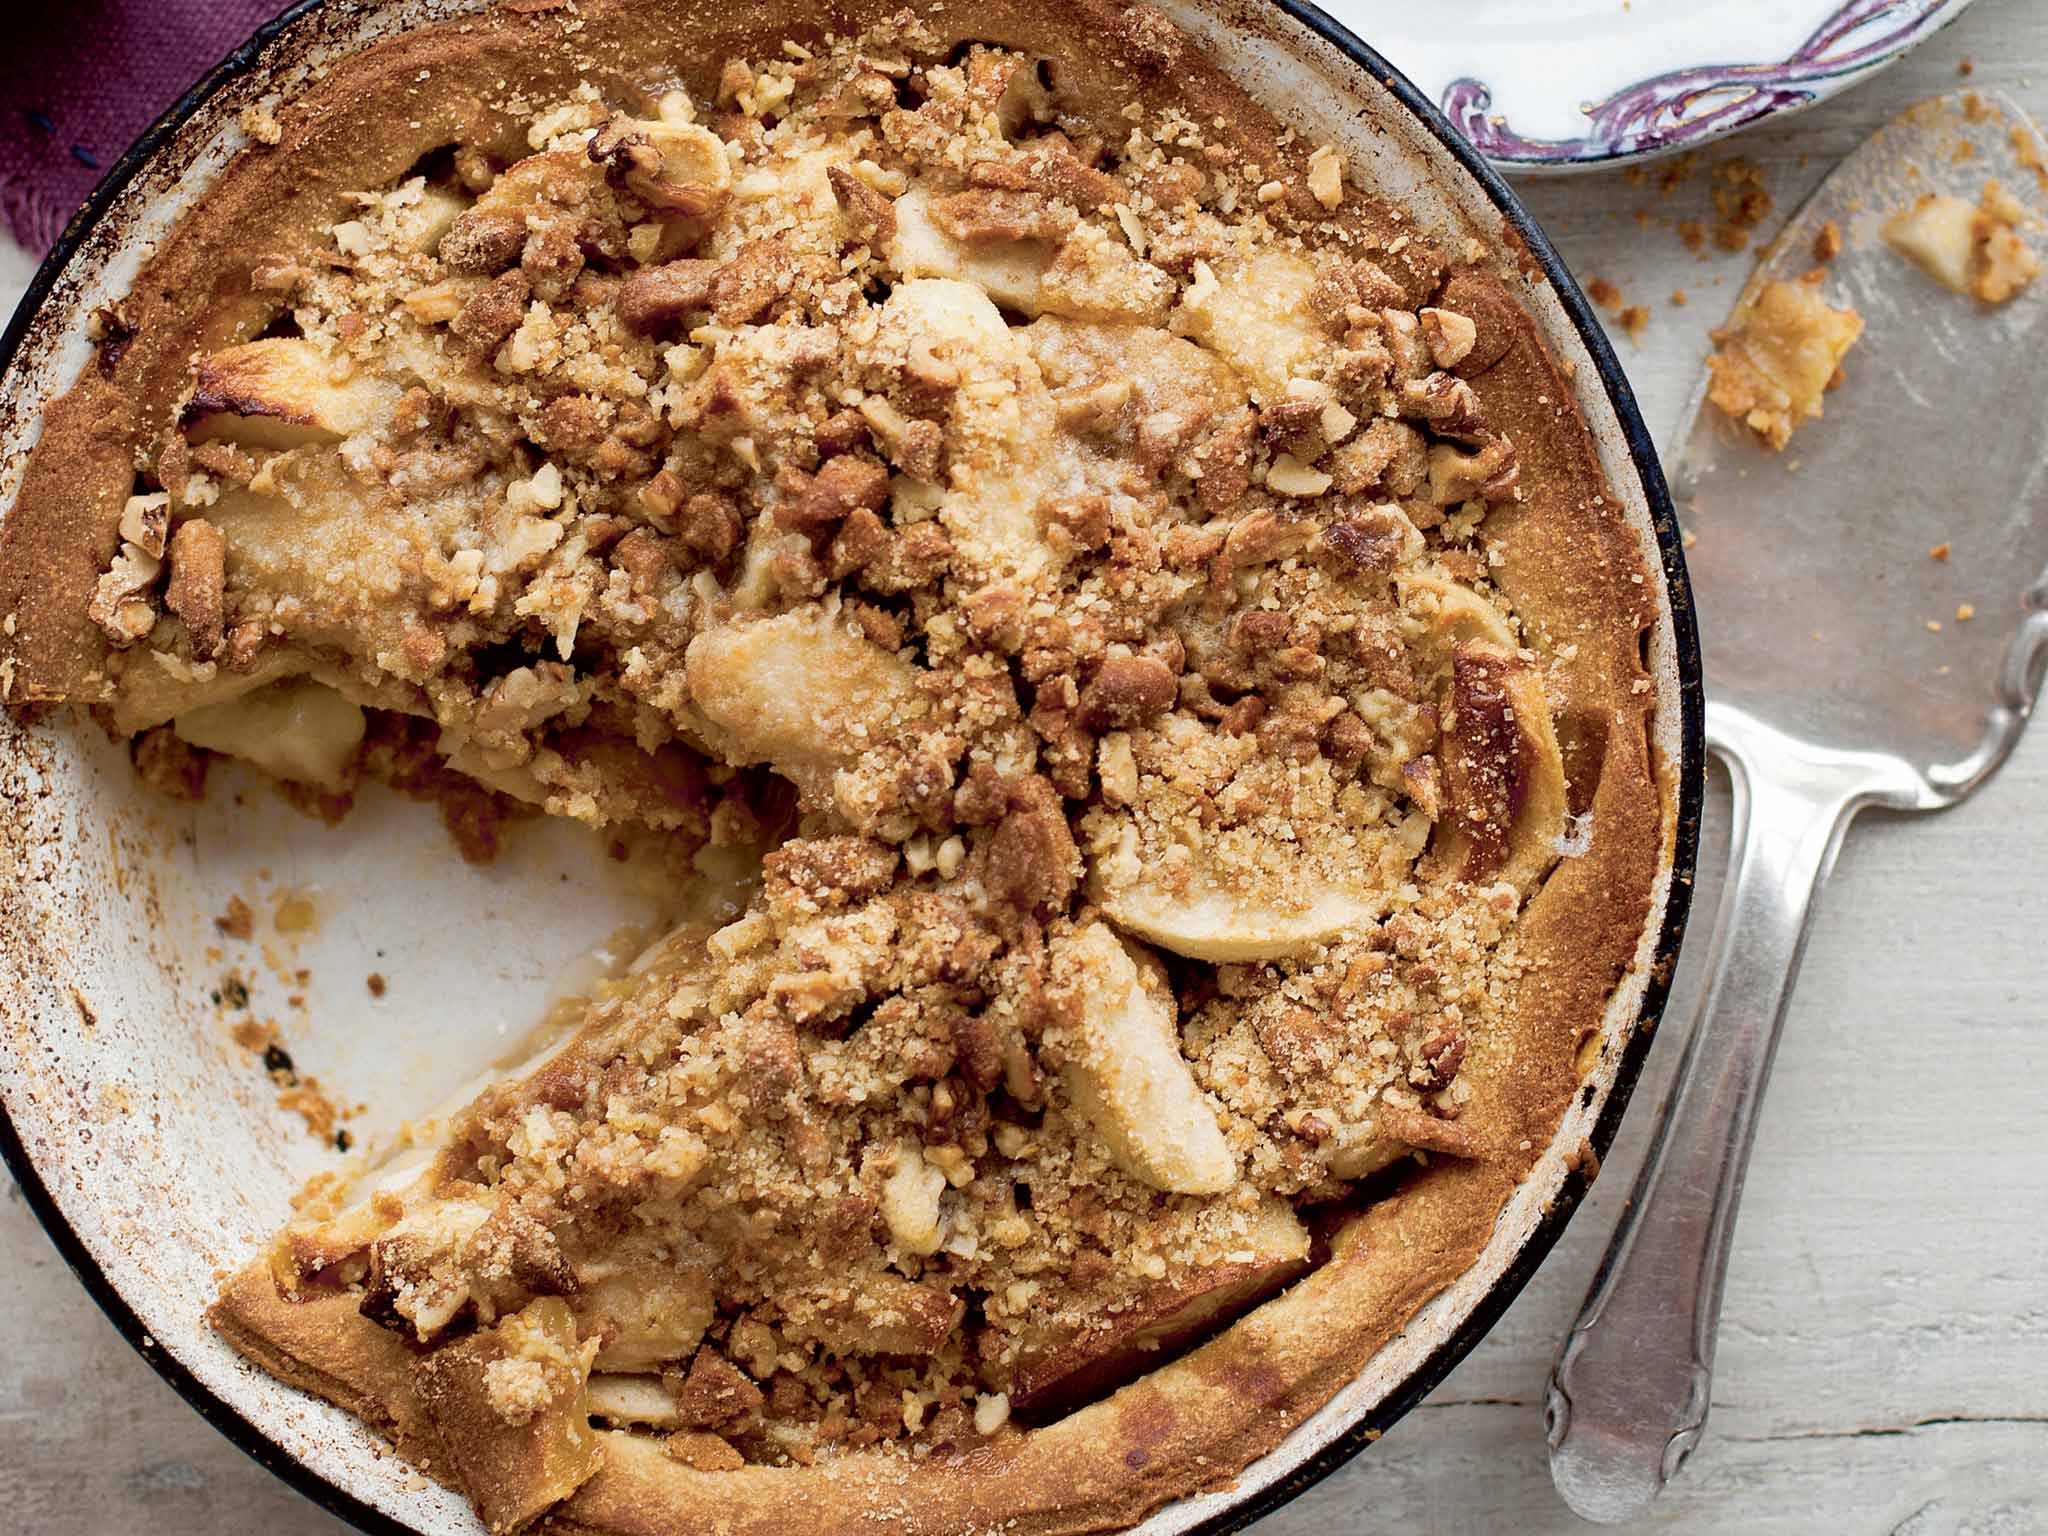 Bill's apple and ginger bake combines the best of crumble and pie in one